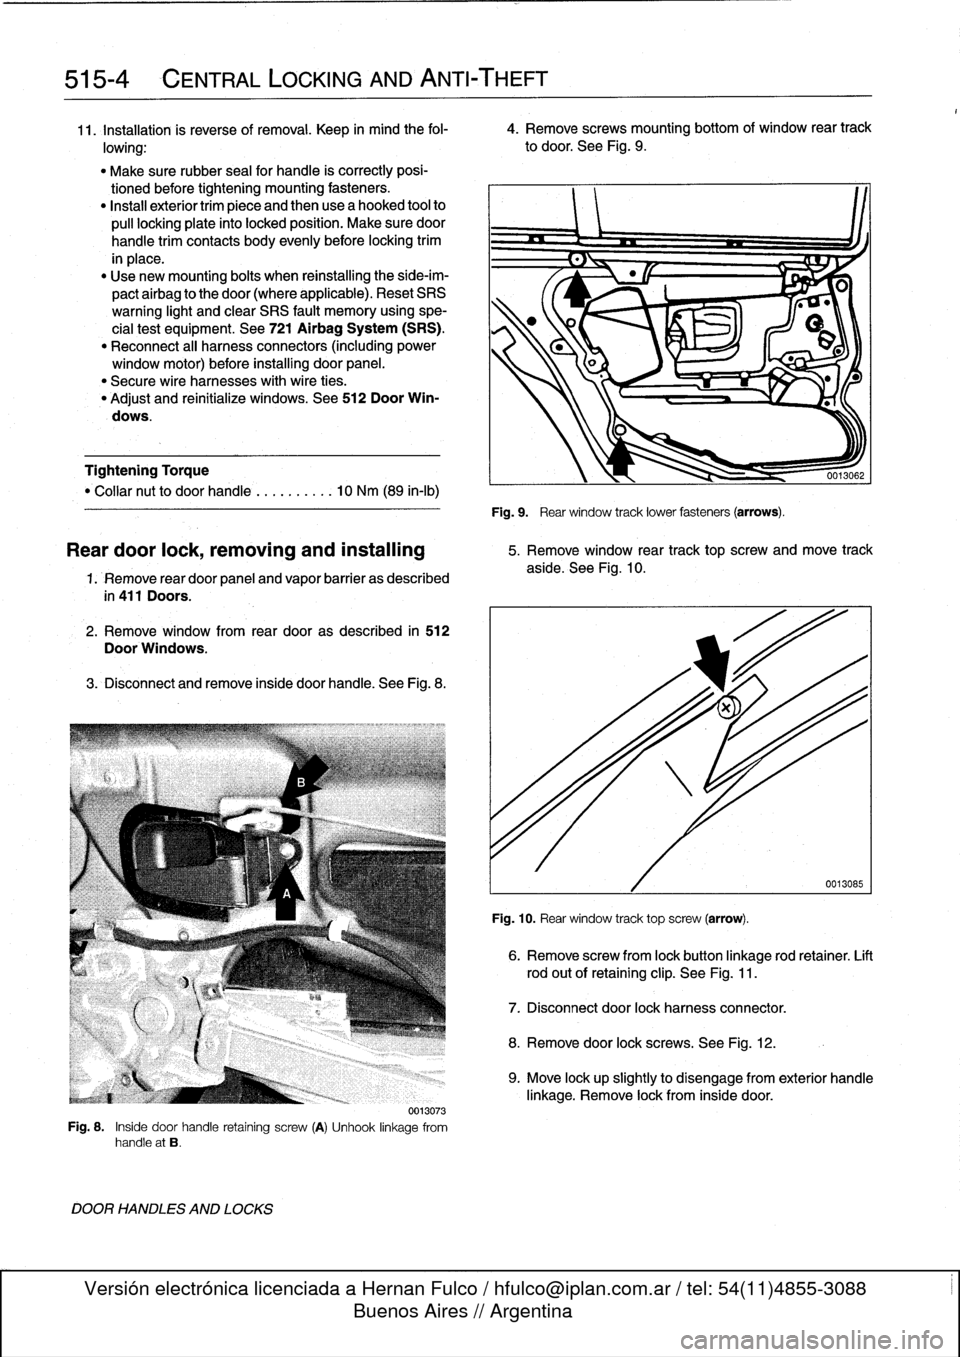 BMW 318i 1996 E36 Owners Guide 
515-4

	

CENTRAL
LOCKING
AND
ANTI-THEFT

11
.
Installation
is
reverse
of
removal
.
Keep
in
mind
the
fol-

	

4
.
Remove
screws
mounting
bottom
of
window
rear
track

lowing
:

	

to
door
.
See
Fig
.
